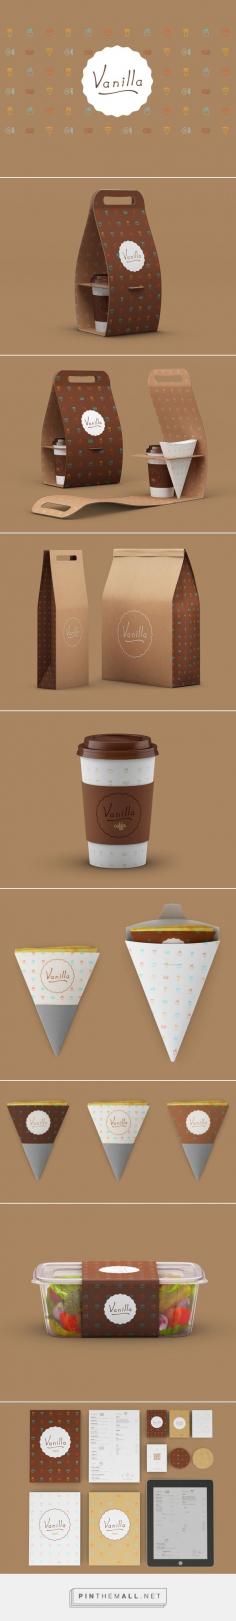 
                    
                        Vanilla identity packaging branding on Behance by Mario Dragic curated by Packaging Diva PD. A small food takeaway cafe where you can get great pancakes, sandwiches and salads.
                    
                